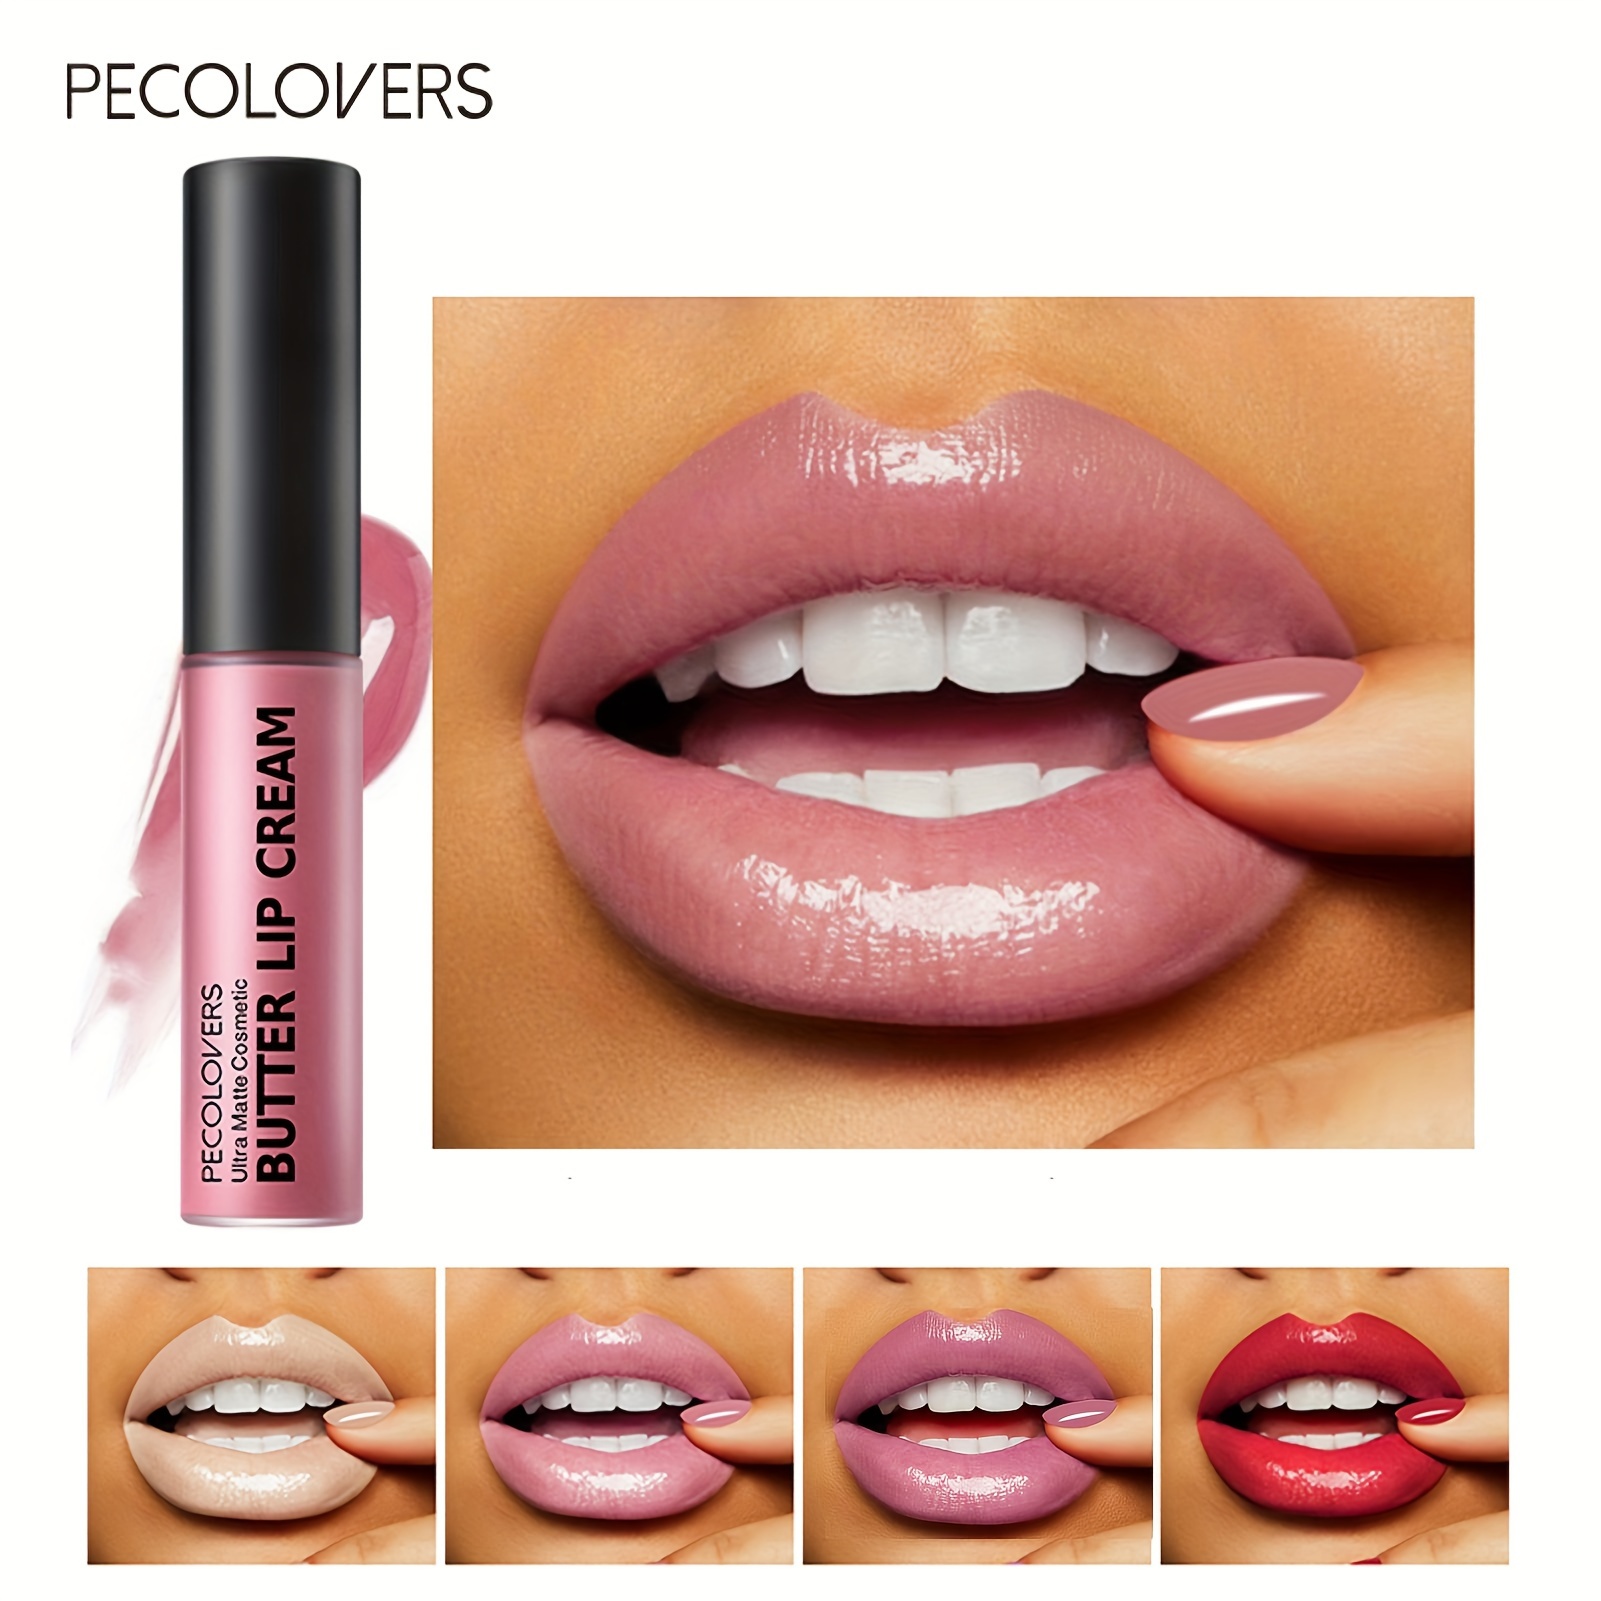 

1 Pc Butter Liquid Lipstick Non-sticky Lip Gloss Lip Glaze Long Lasting Red Pink Lip Makeup, Daily Party Makeup For Women